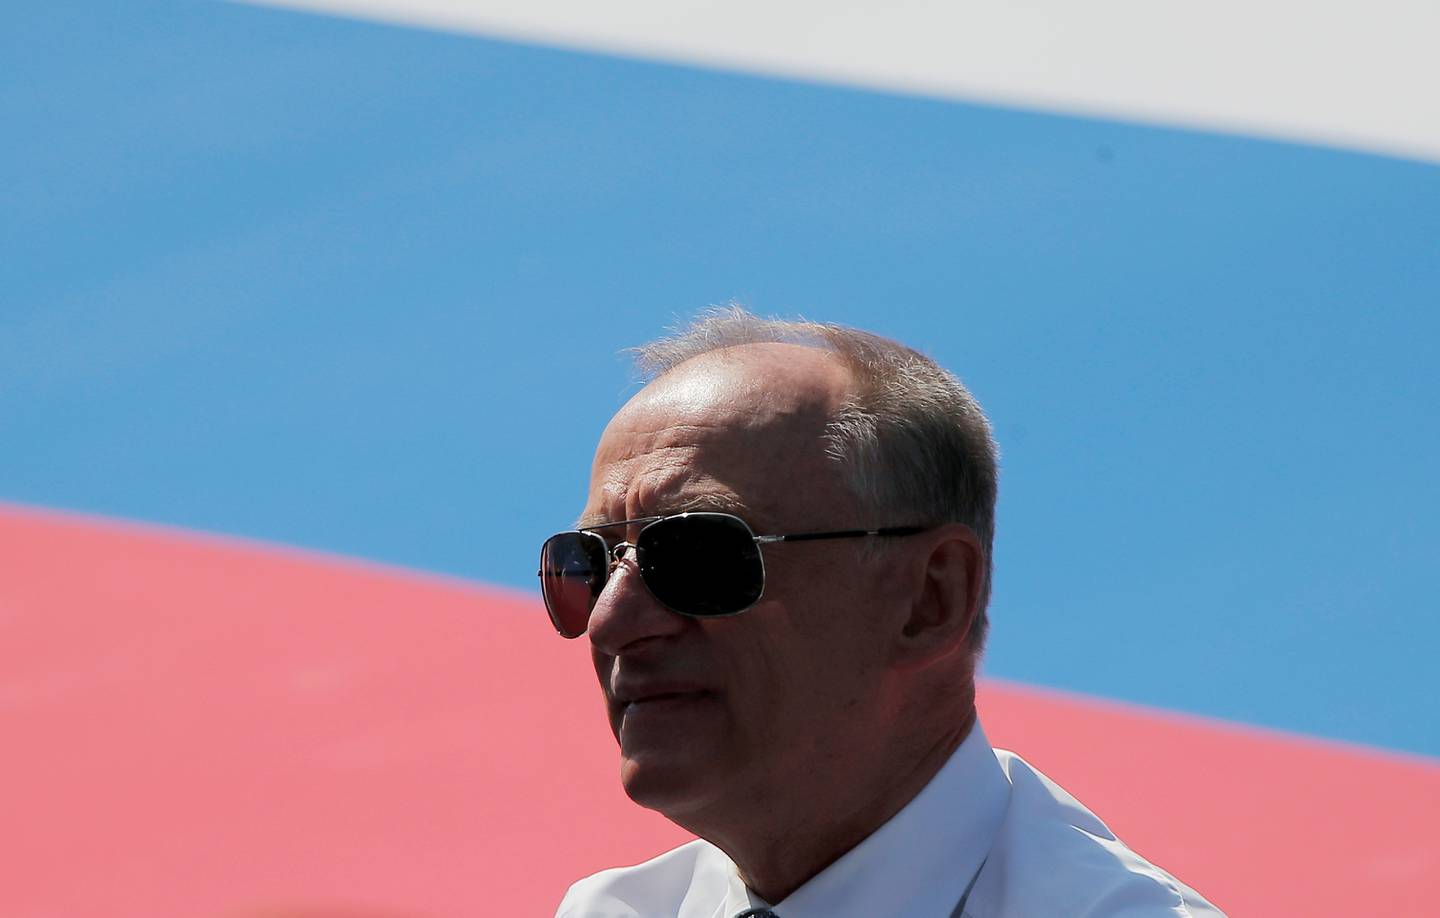 Russia's security council secretary Nikolai Patrushev attends a Second World War Victory Day parade at Red Square in Moscow in June 2020. Reuters